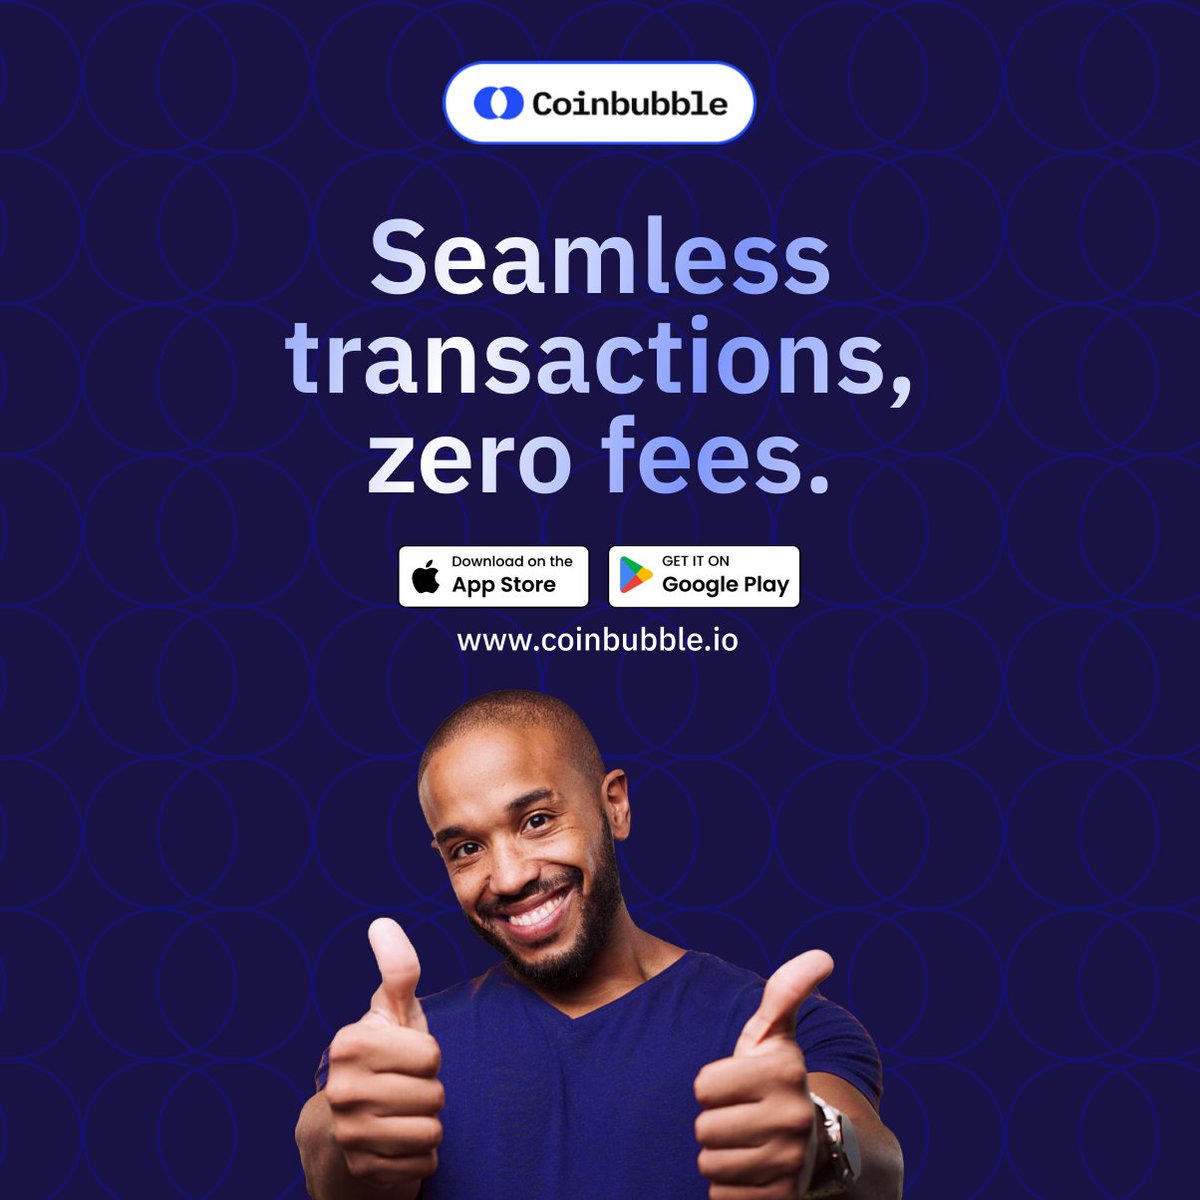 Enjoy transactions as smooth as silk.

Welcome to the future of seamless and fee- free transactions with Coinbubble.

Get the App today play.google.com/store/apps/det…

#Coinbubble #cryptocurrency #seamlesspayments #ZeroFees